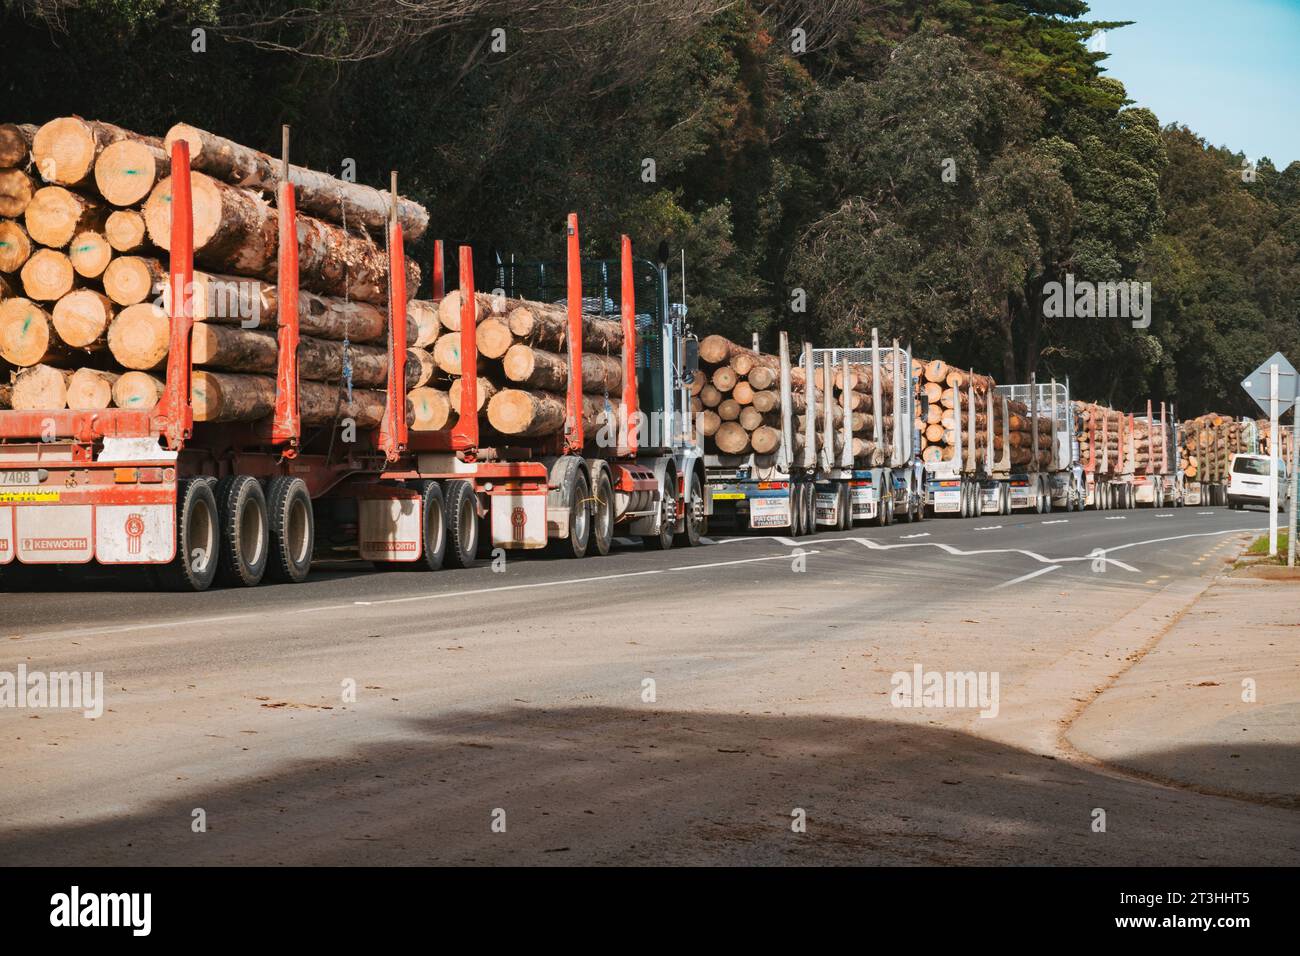 a queue of logging trucks piled with wooden logs, waiting for entry to deliver their cargo at Eastland Port, Gisborne, New Zealand Stock Photo